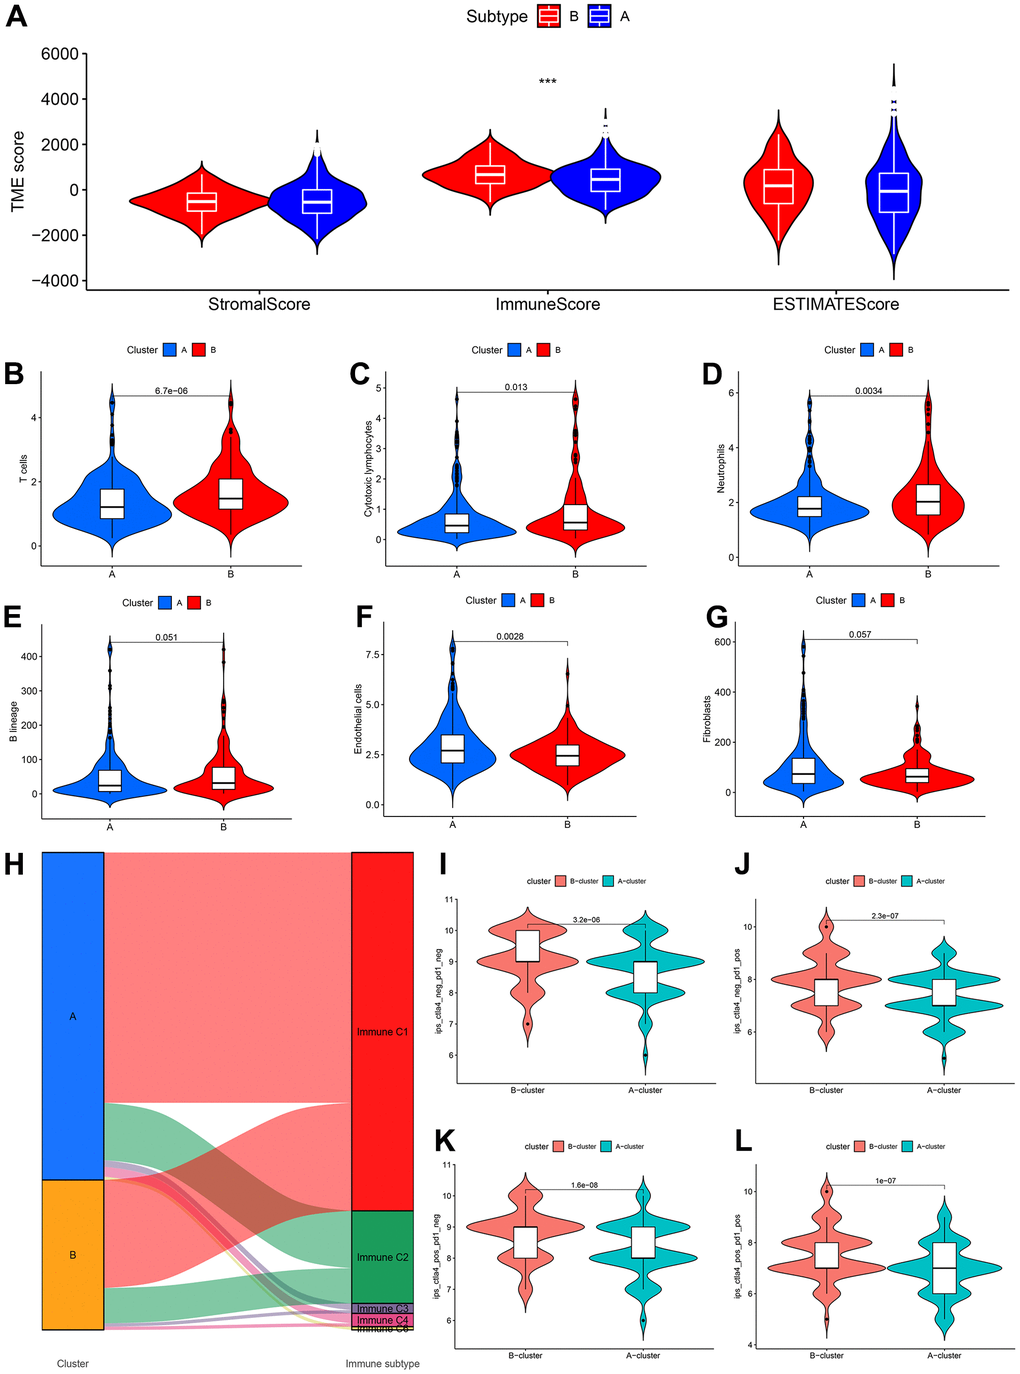 CDM subtypes associated with immunotherapeutic response predictors in TCGA-COAD datasets. (A) Tumor immune microenvironment analysis between CDM immune subtype A and subtype B by Microenvironment Cell Populations counter algorithm. (B–G) The association between CDM subtypes and immune cell infiltration; (B) for T cells; (C) for cytotoxic lymphocytes; (D) for neutrophils; (E) for B lineages; (F) for endothelial cells; (G) for fibroblasts. (H) Sankey diagram between the CDM subtypes and immune subtypes (C1-C6). (I–L) Relationship between the CDM subtypes and the immunotherapy data of PD1 and CTLA4 (I) for PD1 and CTLA4 negative expression; (J) for PD1 positive expression and CTLA4 negative expression; (K) for CTLA4 positive expression and PD1 negative expression; (L) for PD1 and CTLA4 negative expression.